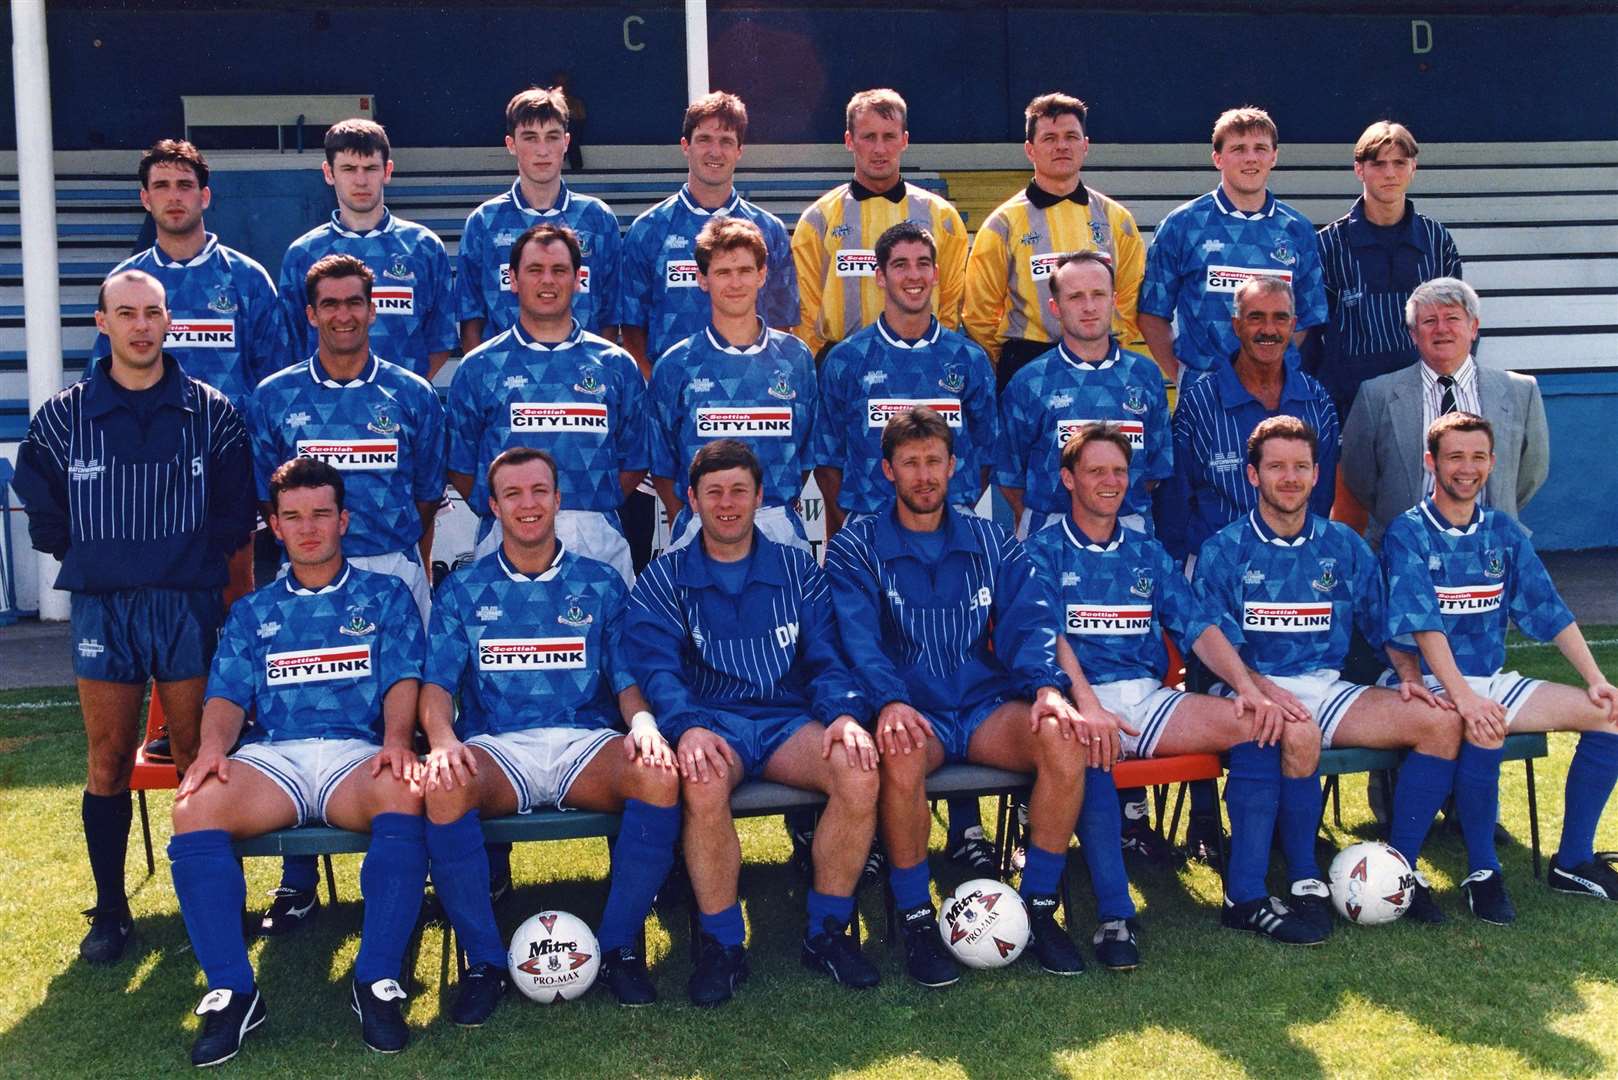 Sergei Baltacha's squad for the club's inaugural 1994/95 season 1994-95. Mark McAllister is pictured front, second from left.